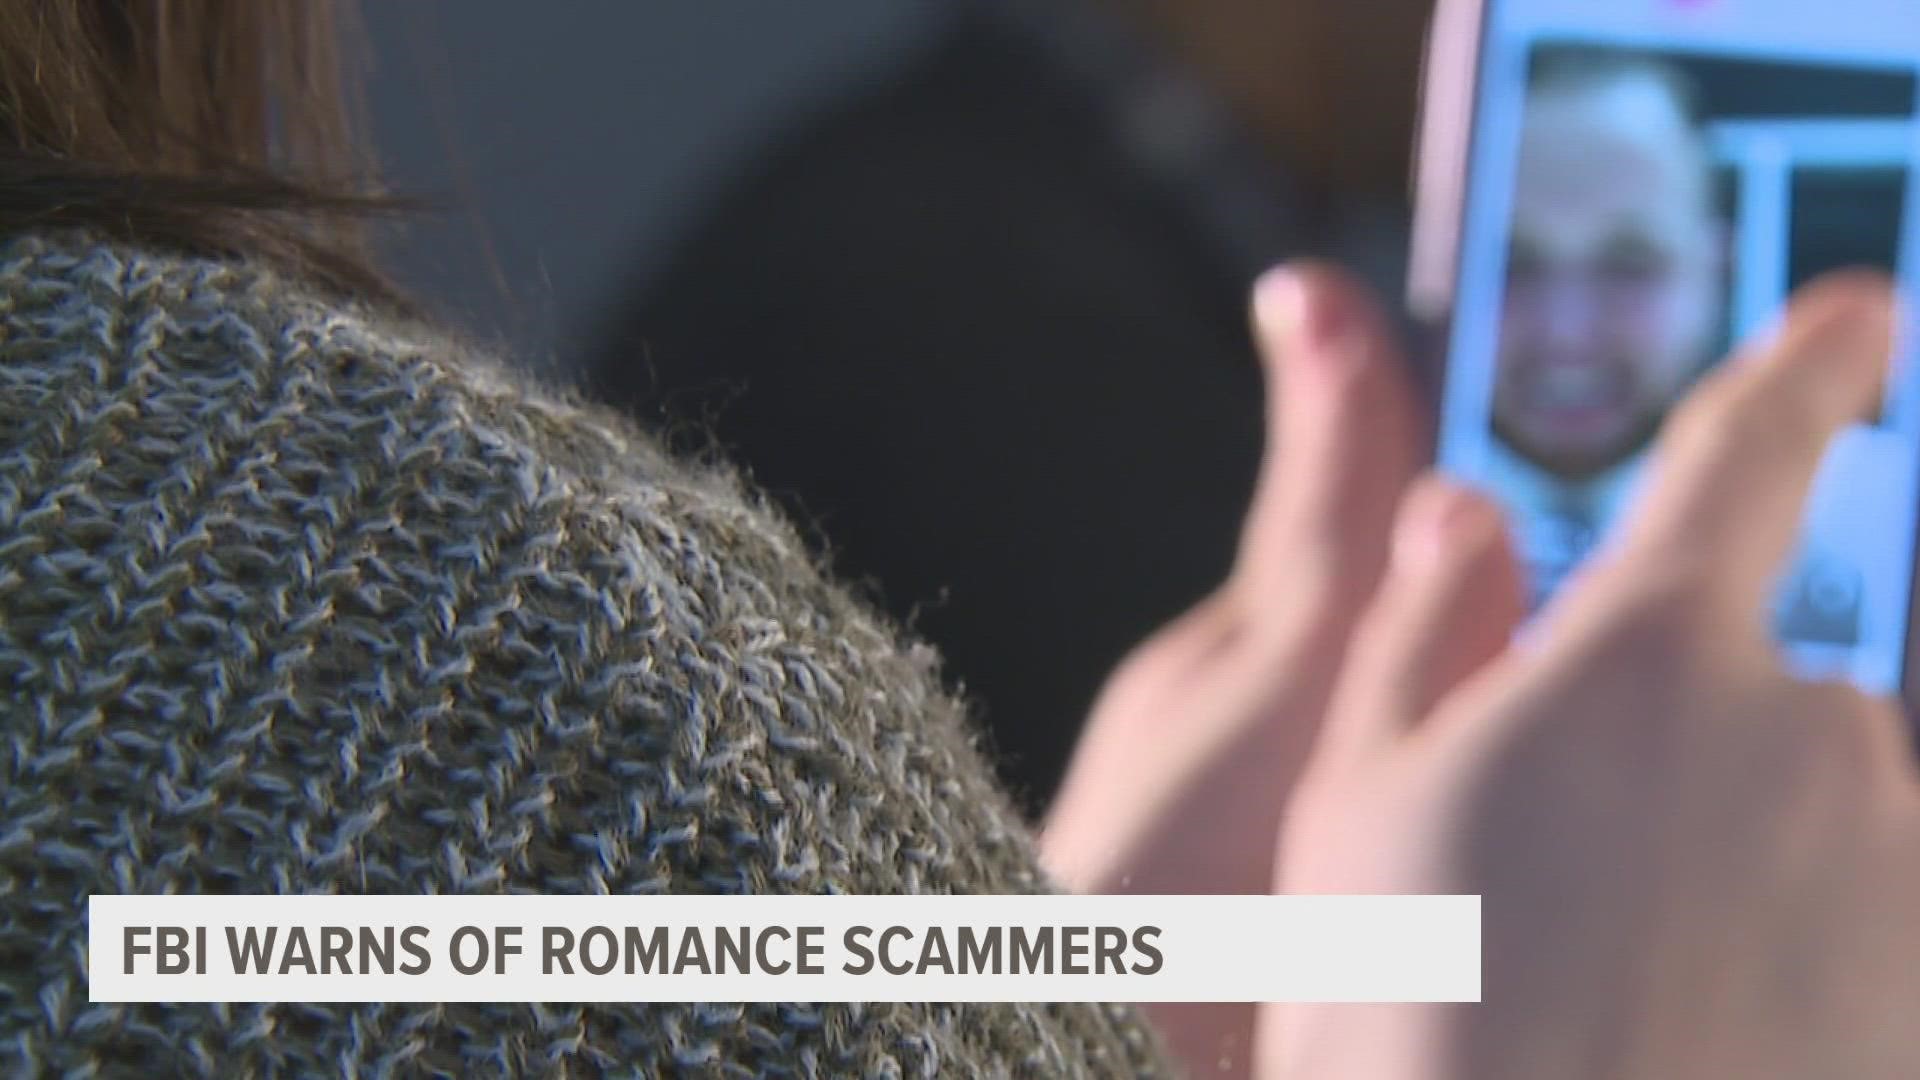 Don't let your wallet take a hit from Cupid. The Federal Trade Commission said romance scams have claimed $1.3 billion in the last five years.